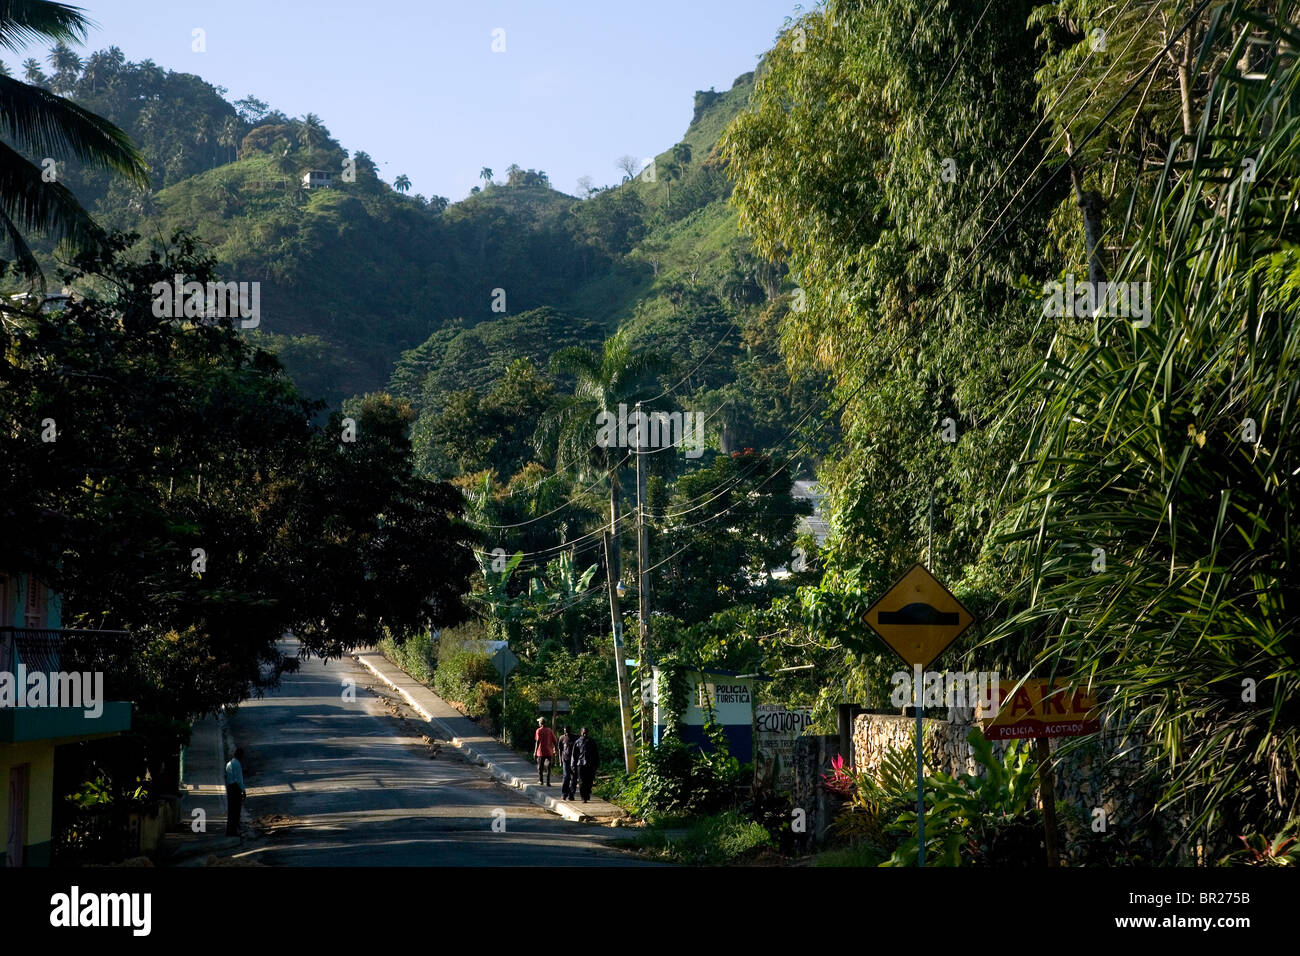 Scenic view of a mountain road in the Dominican Republic Stock Photo